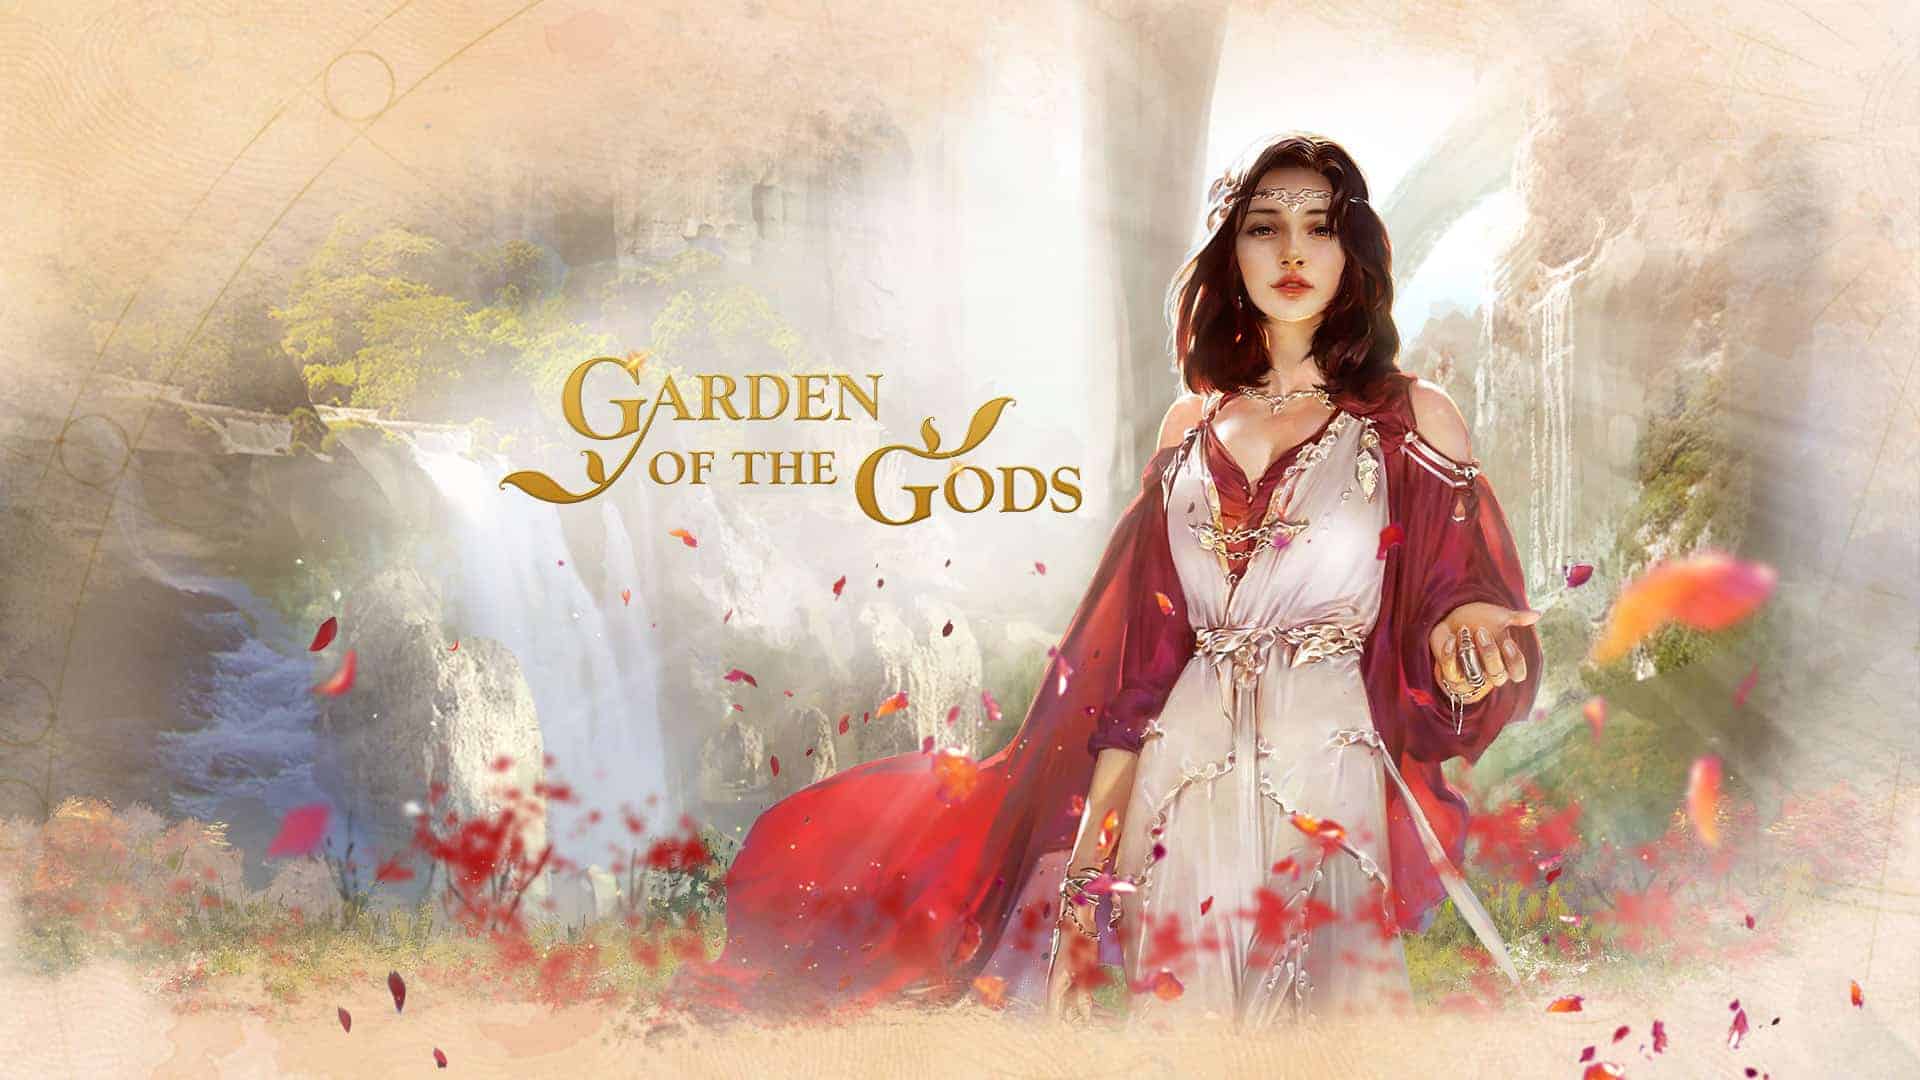 Archeage Garden of the Gods Expansion Announced